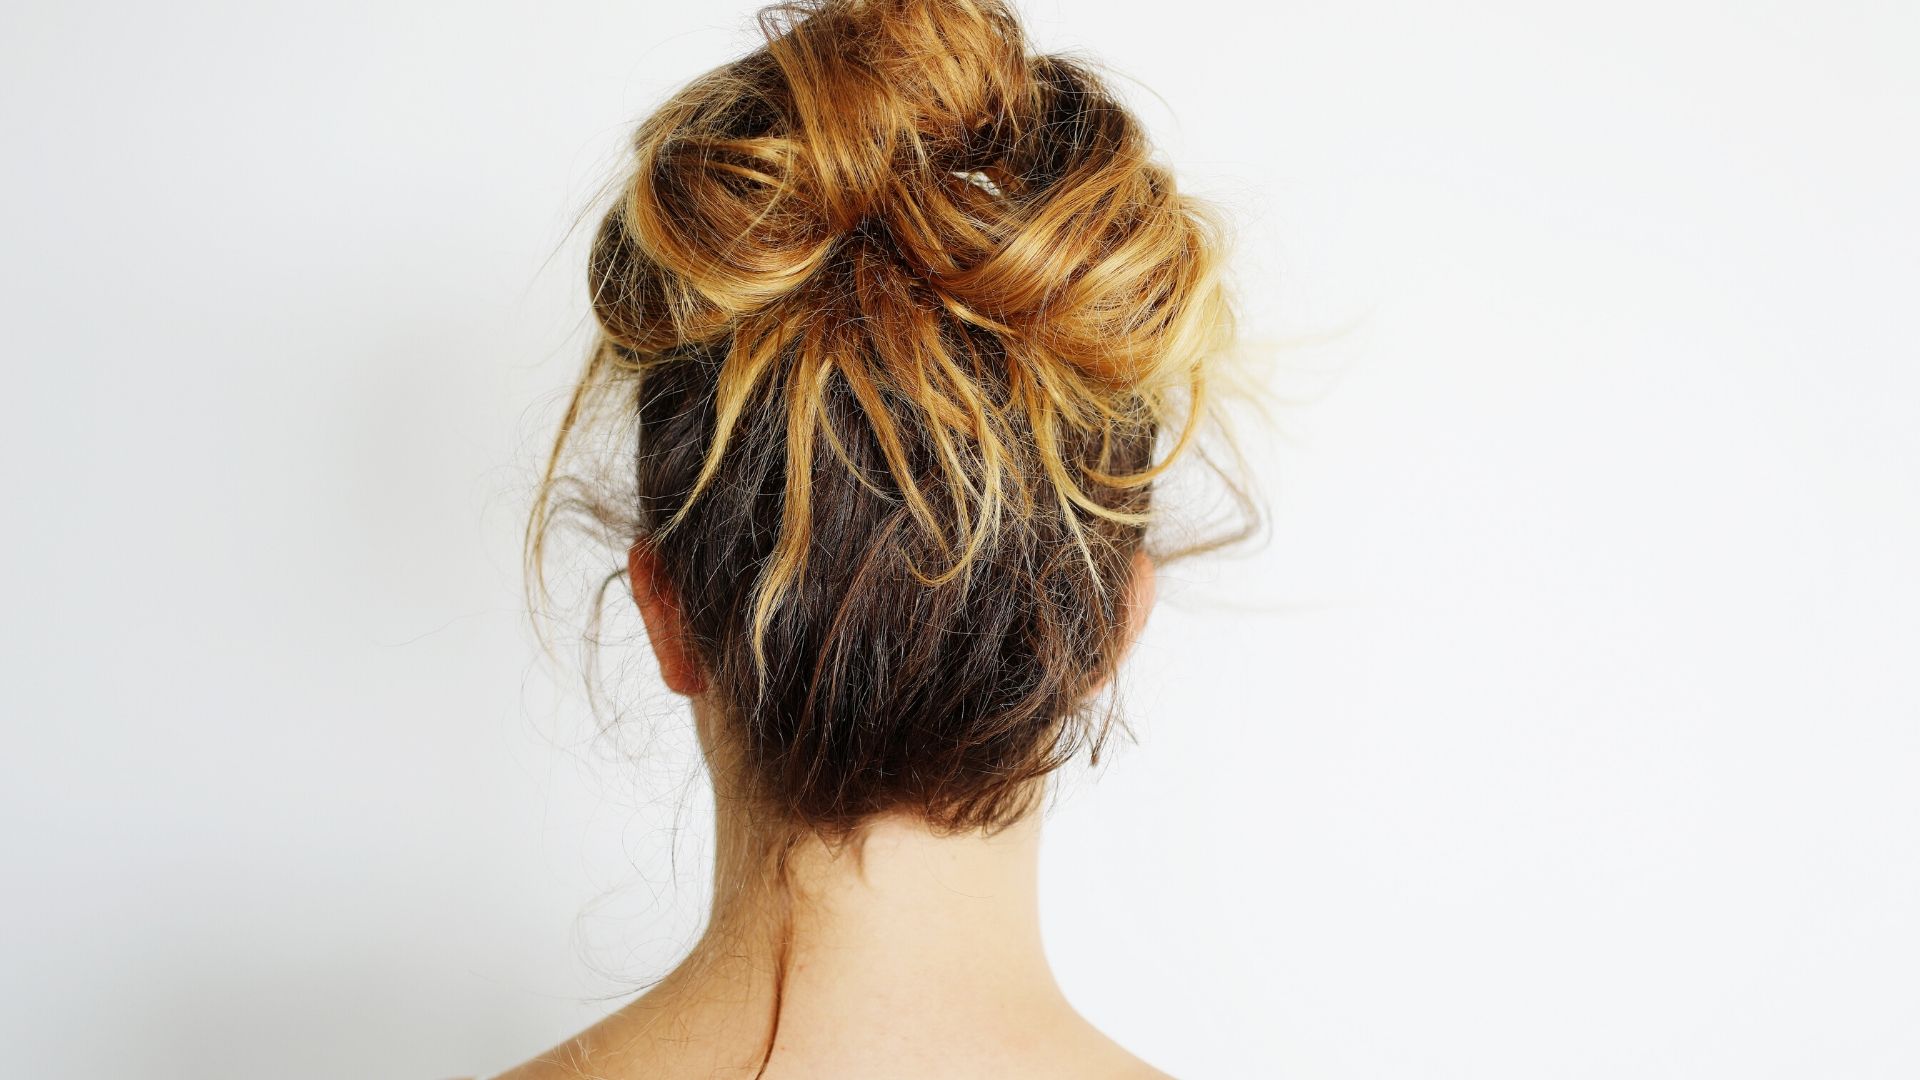 How to do a messy top knot with thin hair How To Make The Cutest Messy Bun In 3 Minutes Or Less Stonegirl